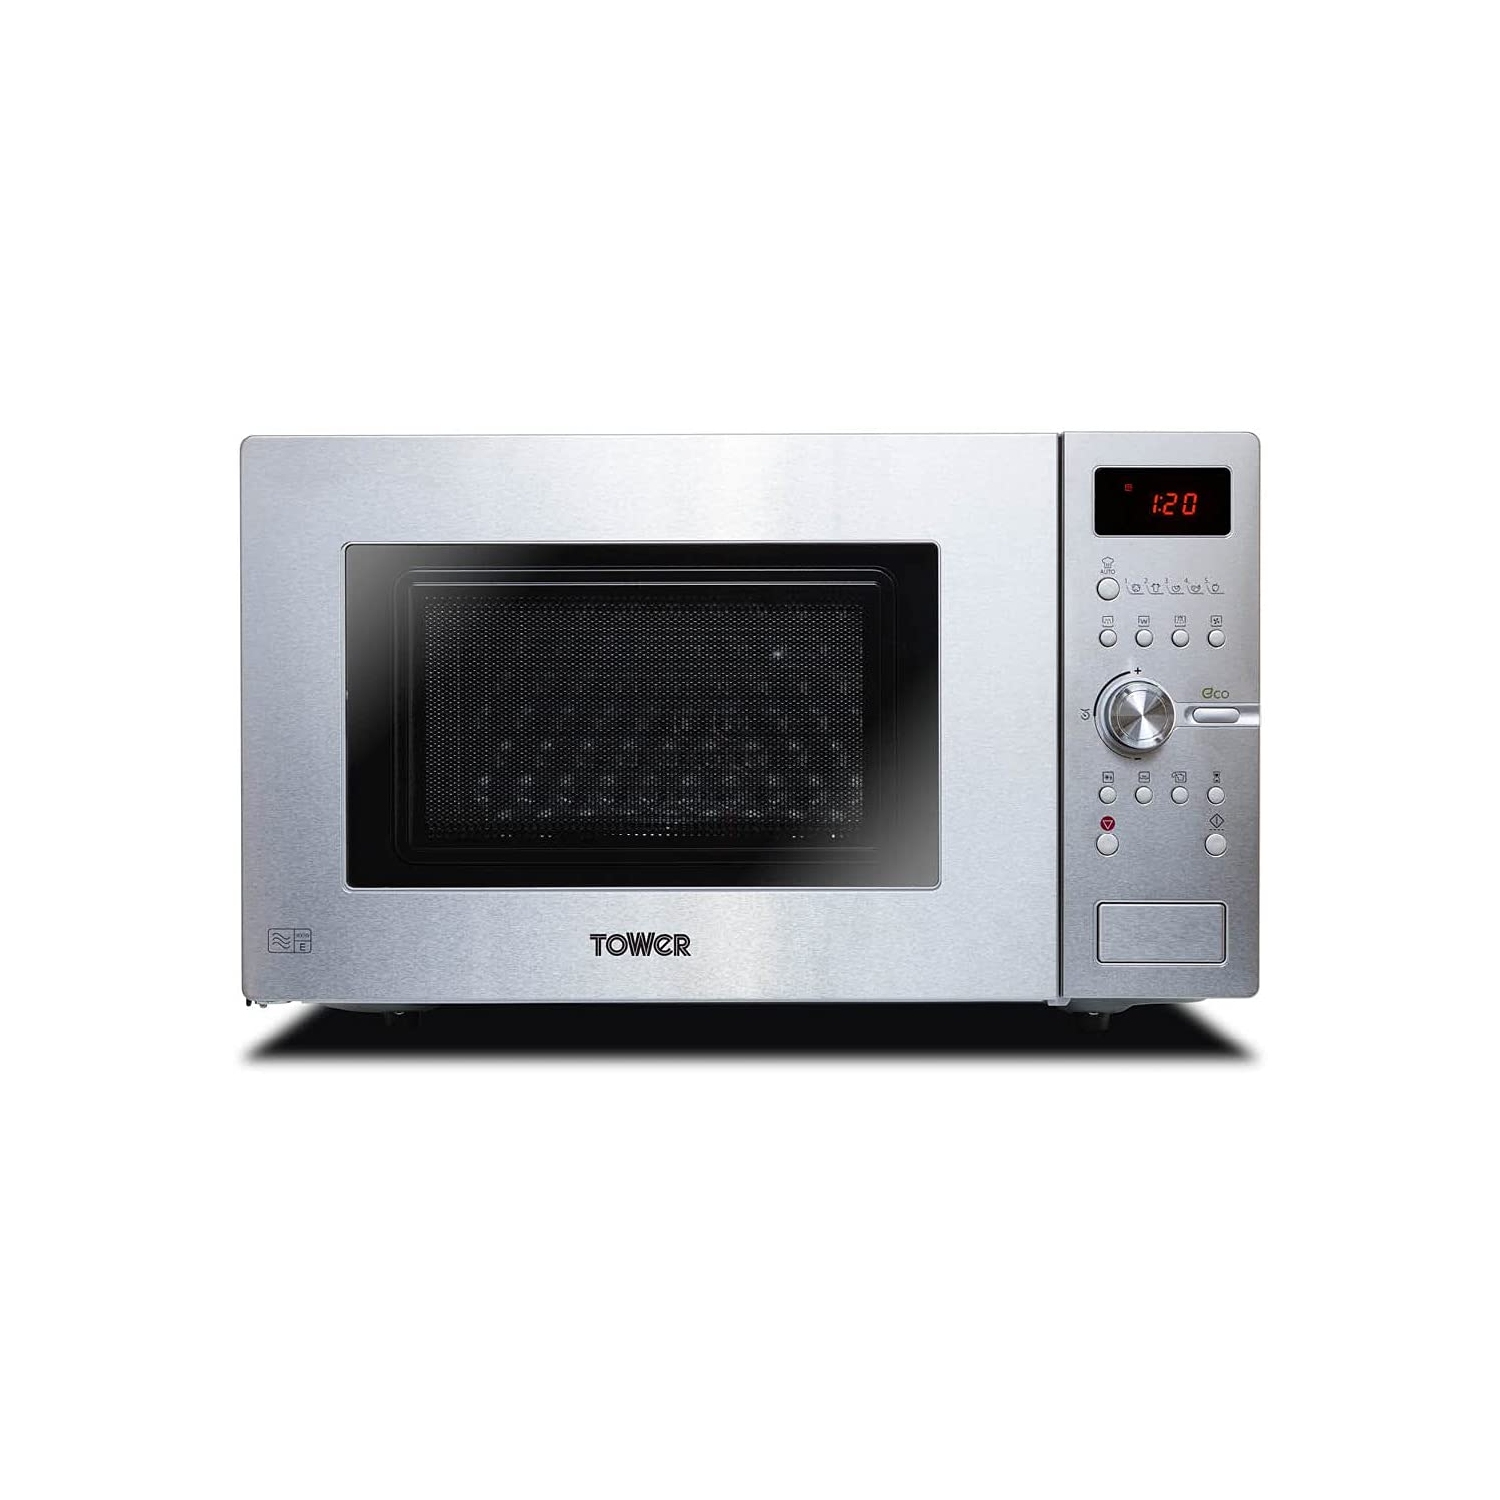 Tower 28L Easy Steam Cleaning Combination Microwave Oven - 0